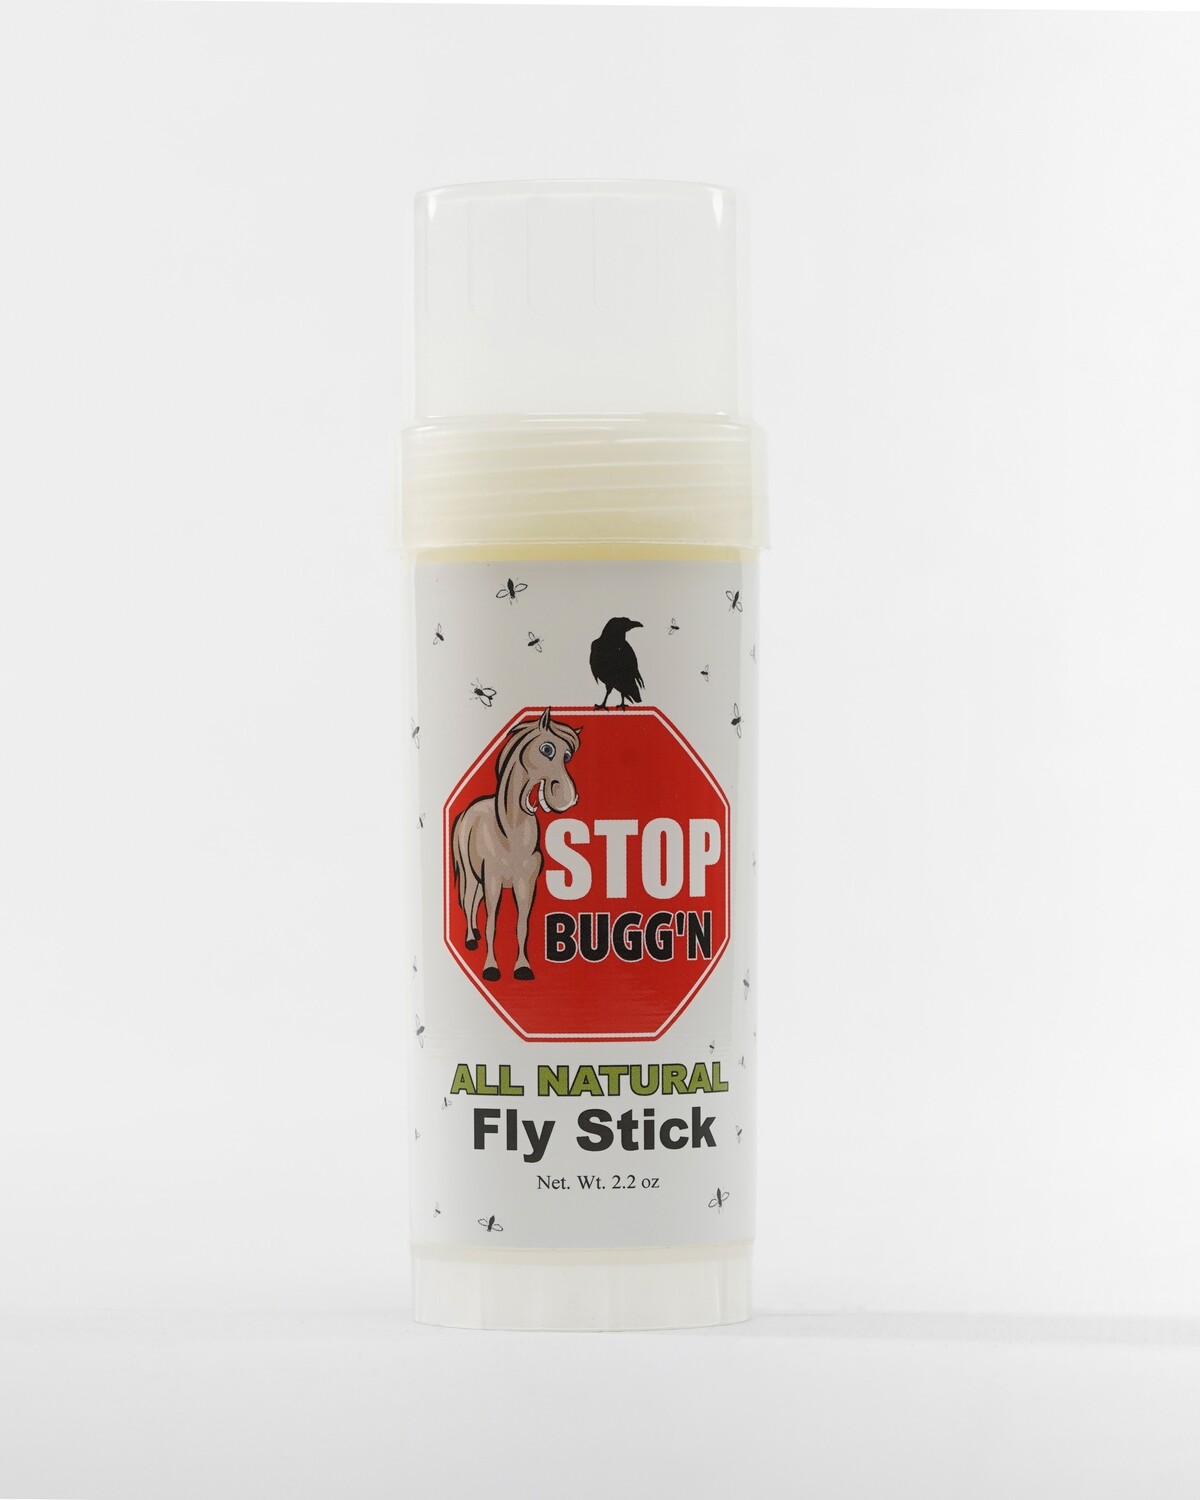 All Natural Fly Stick